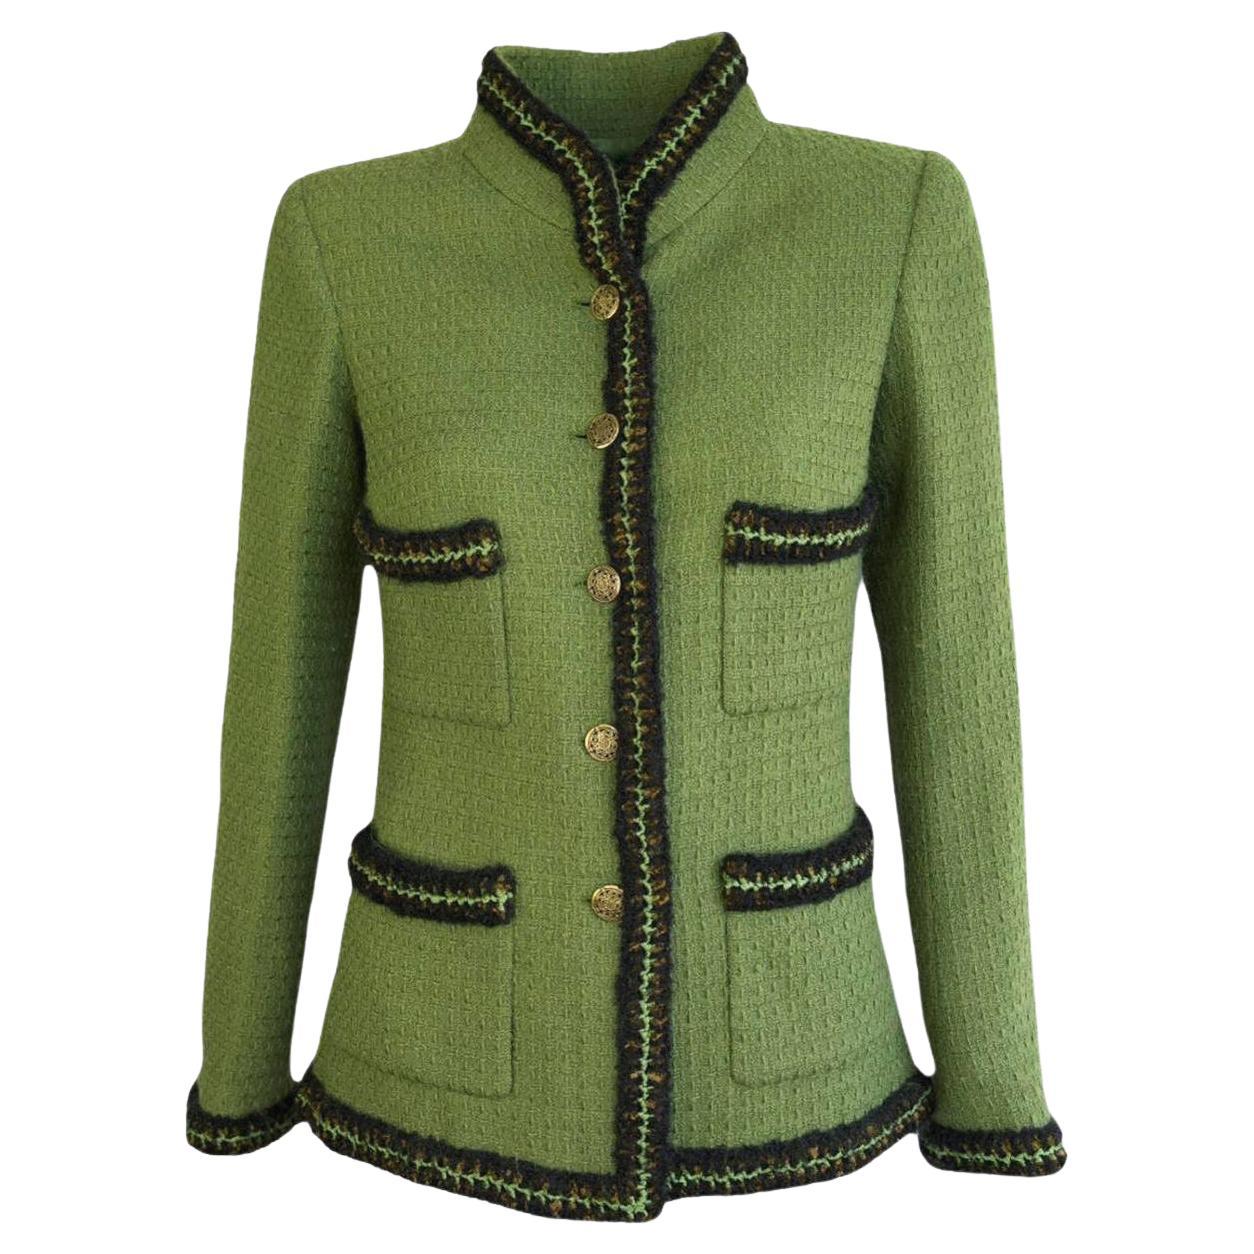 Chanel Most Iconic Green Tweed Jacket from Ad Campaign For Sale